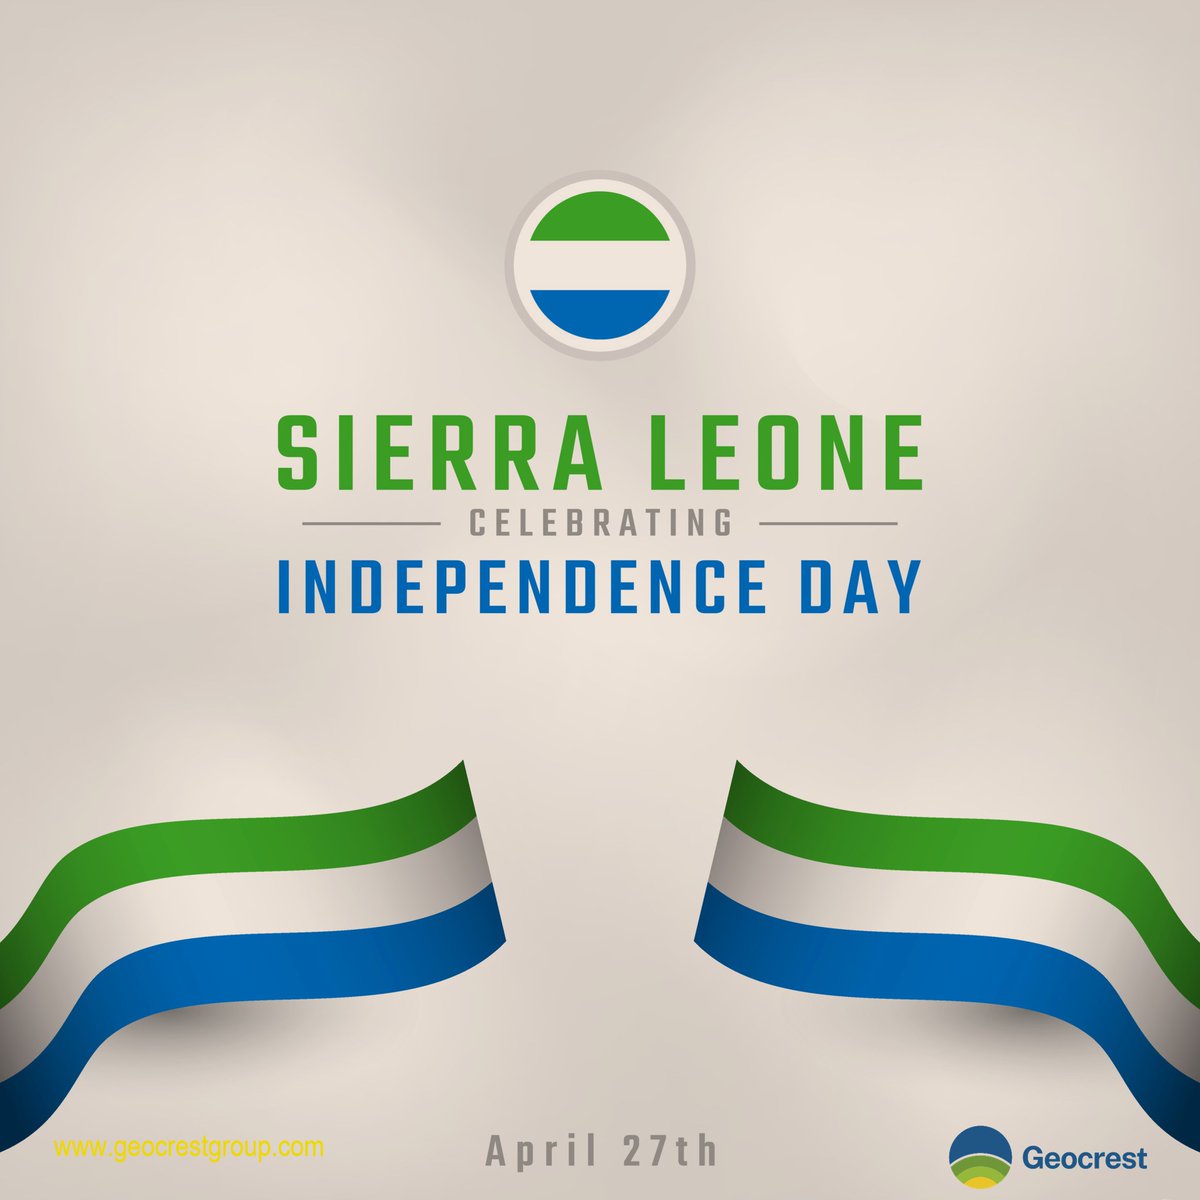 Happy Independence Day, Sierra Leone! Today, let's celebrate the resilience, unity, and rich culture that defines this great nation.

May you continue to strive for progress,  and peace for all Sierra Leoneans.

#SierraLeoneIndependenceDay #Salone63 #Unity #Resilience
#Geocrest